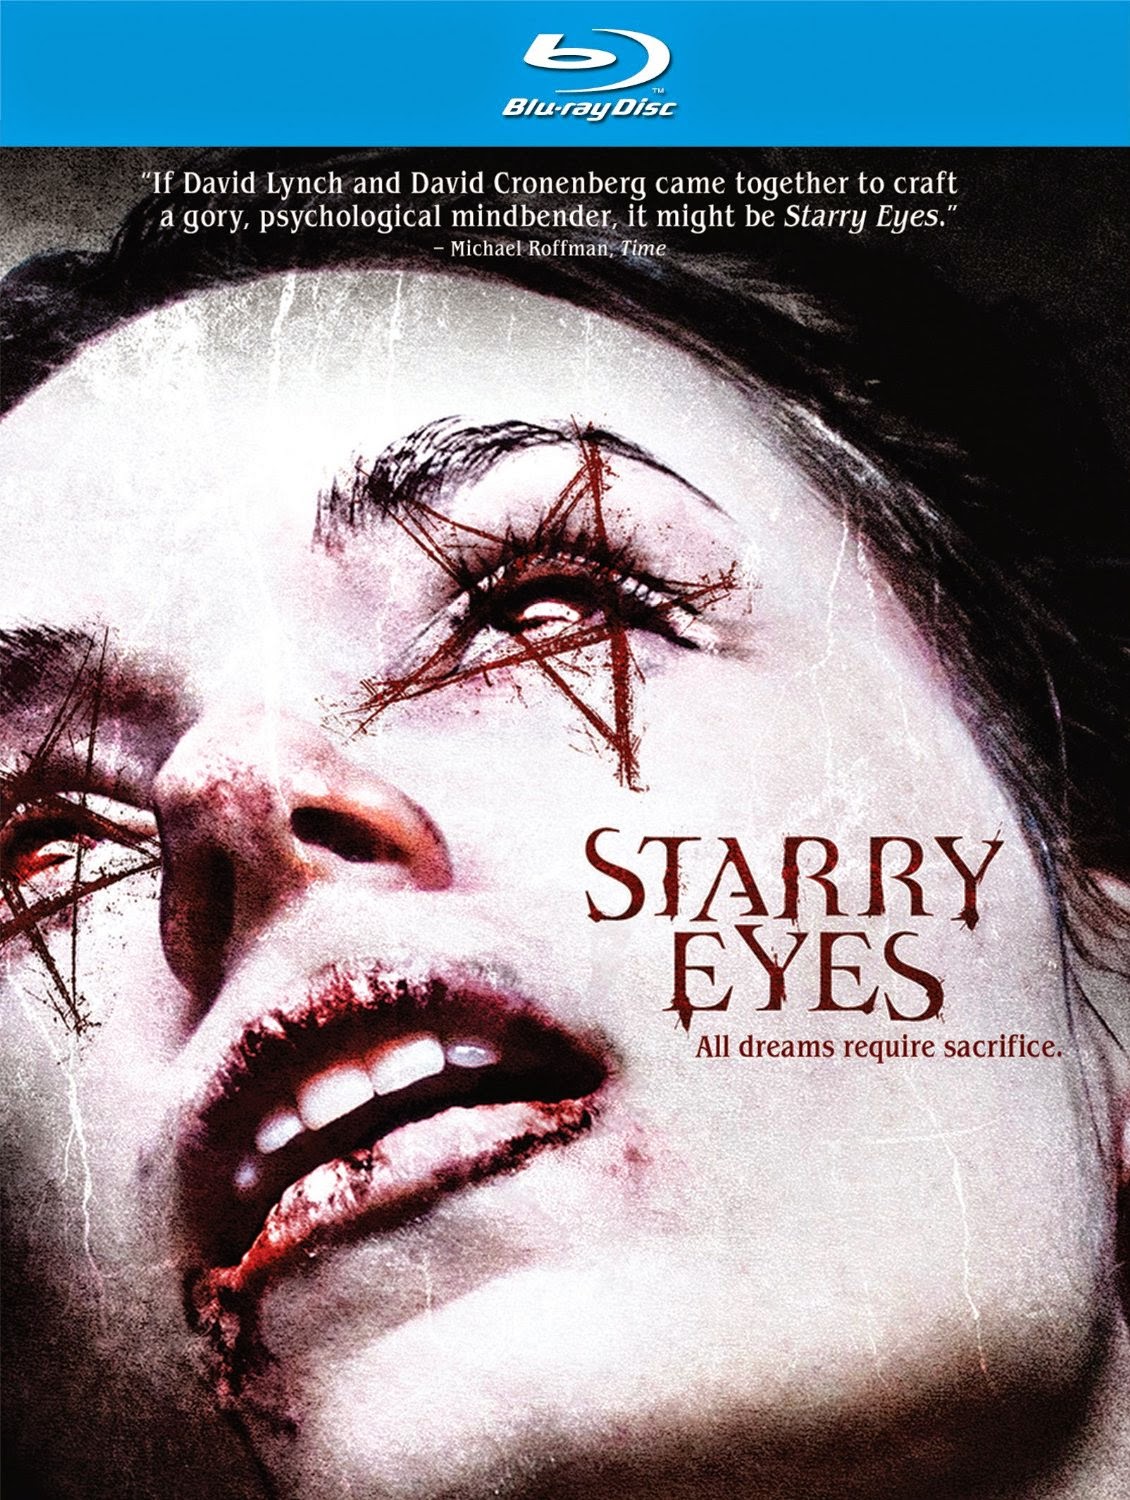 February 3rd Blu-ray \u0026amp; DVD Releases Include Starry Eyes, Ouija ...